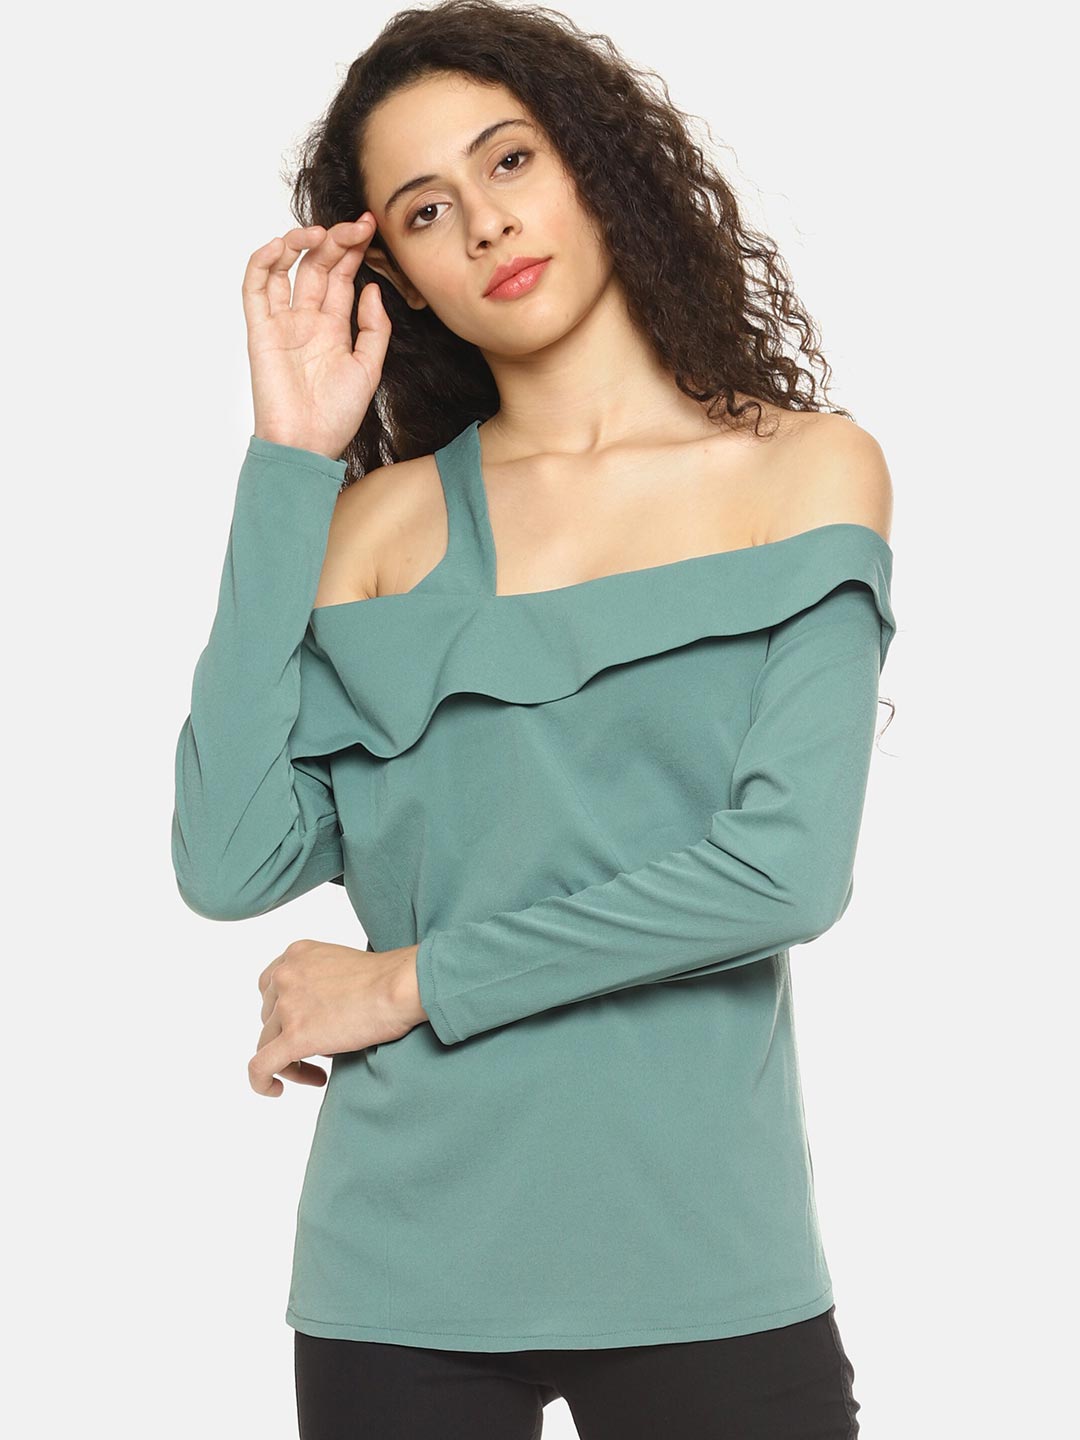 SAHORA Green Solid One Shoulder Crepe Top Price in India